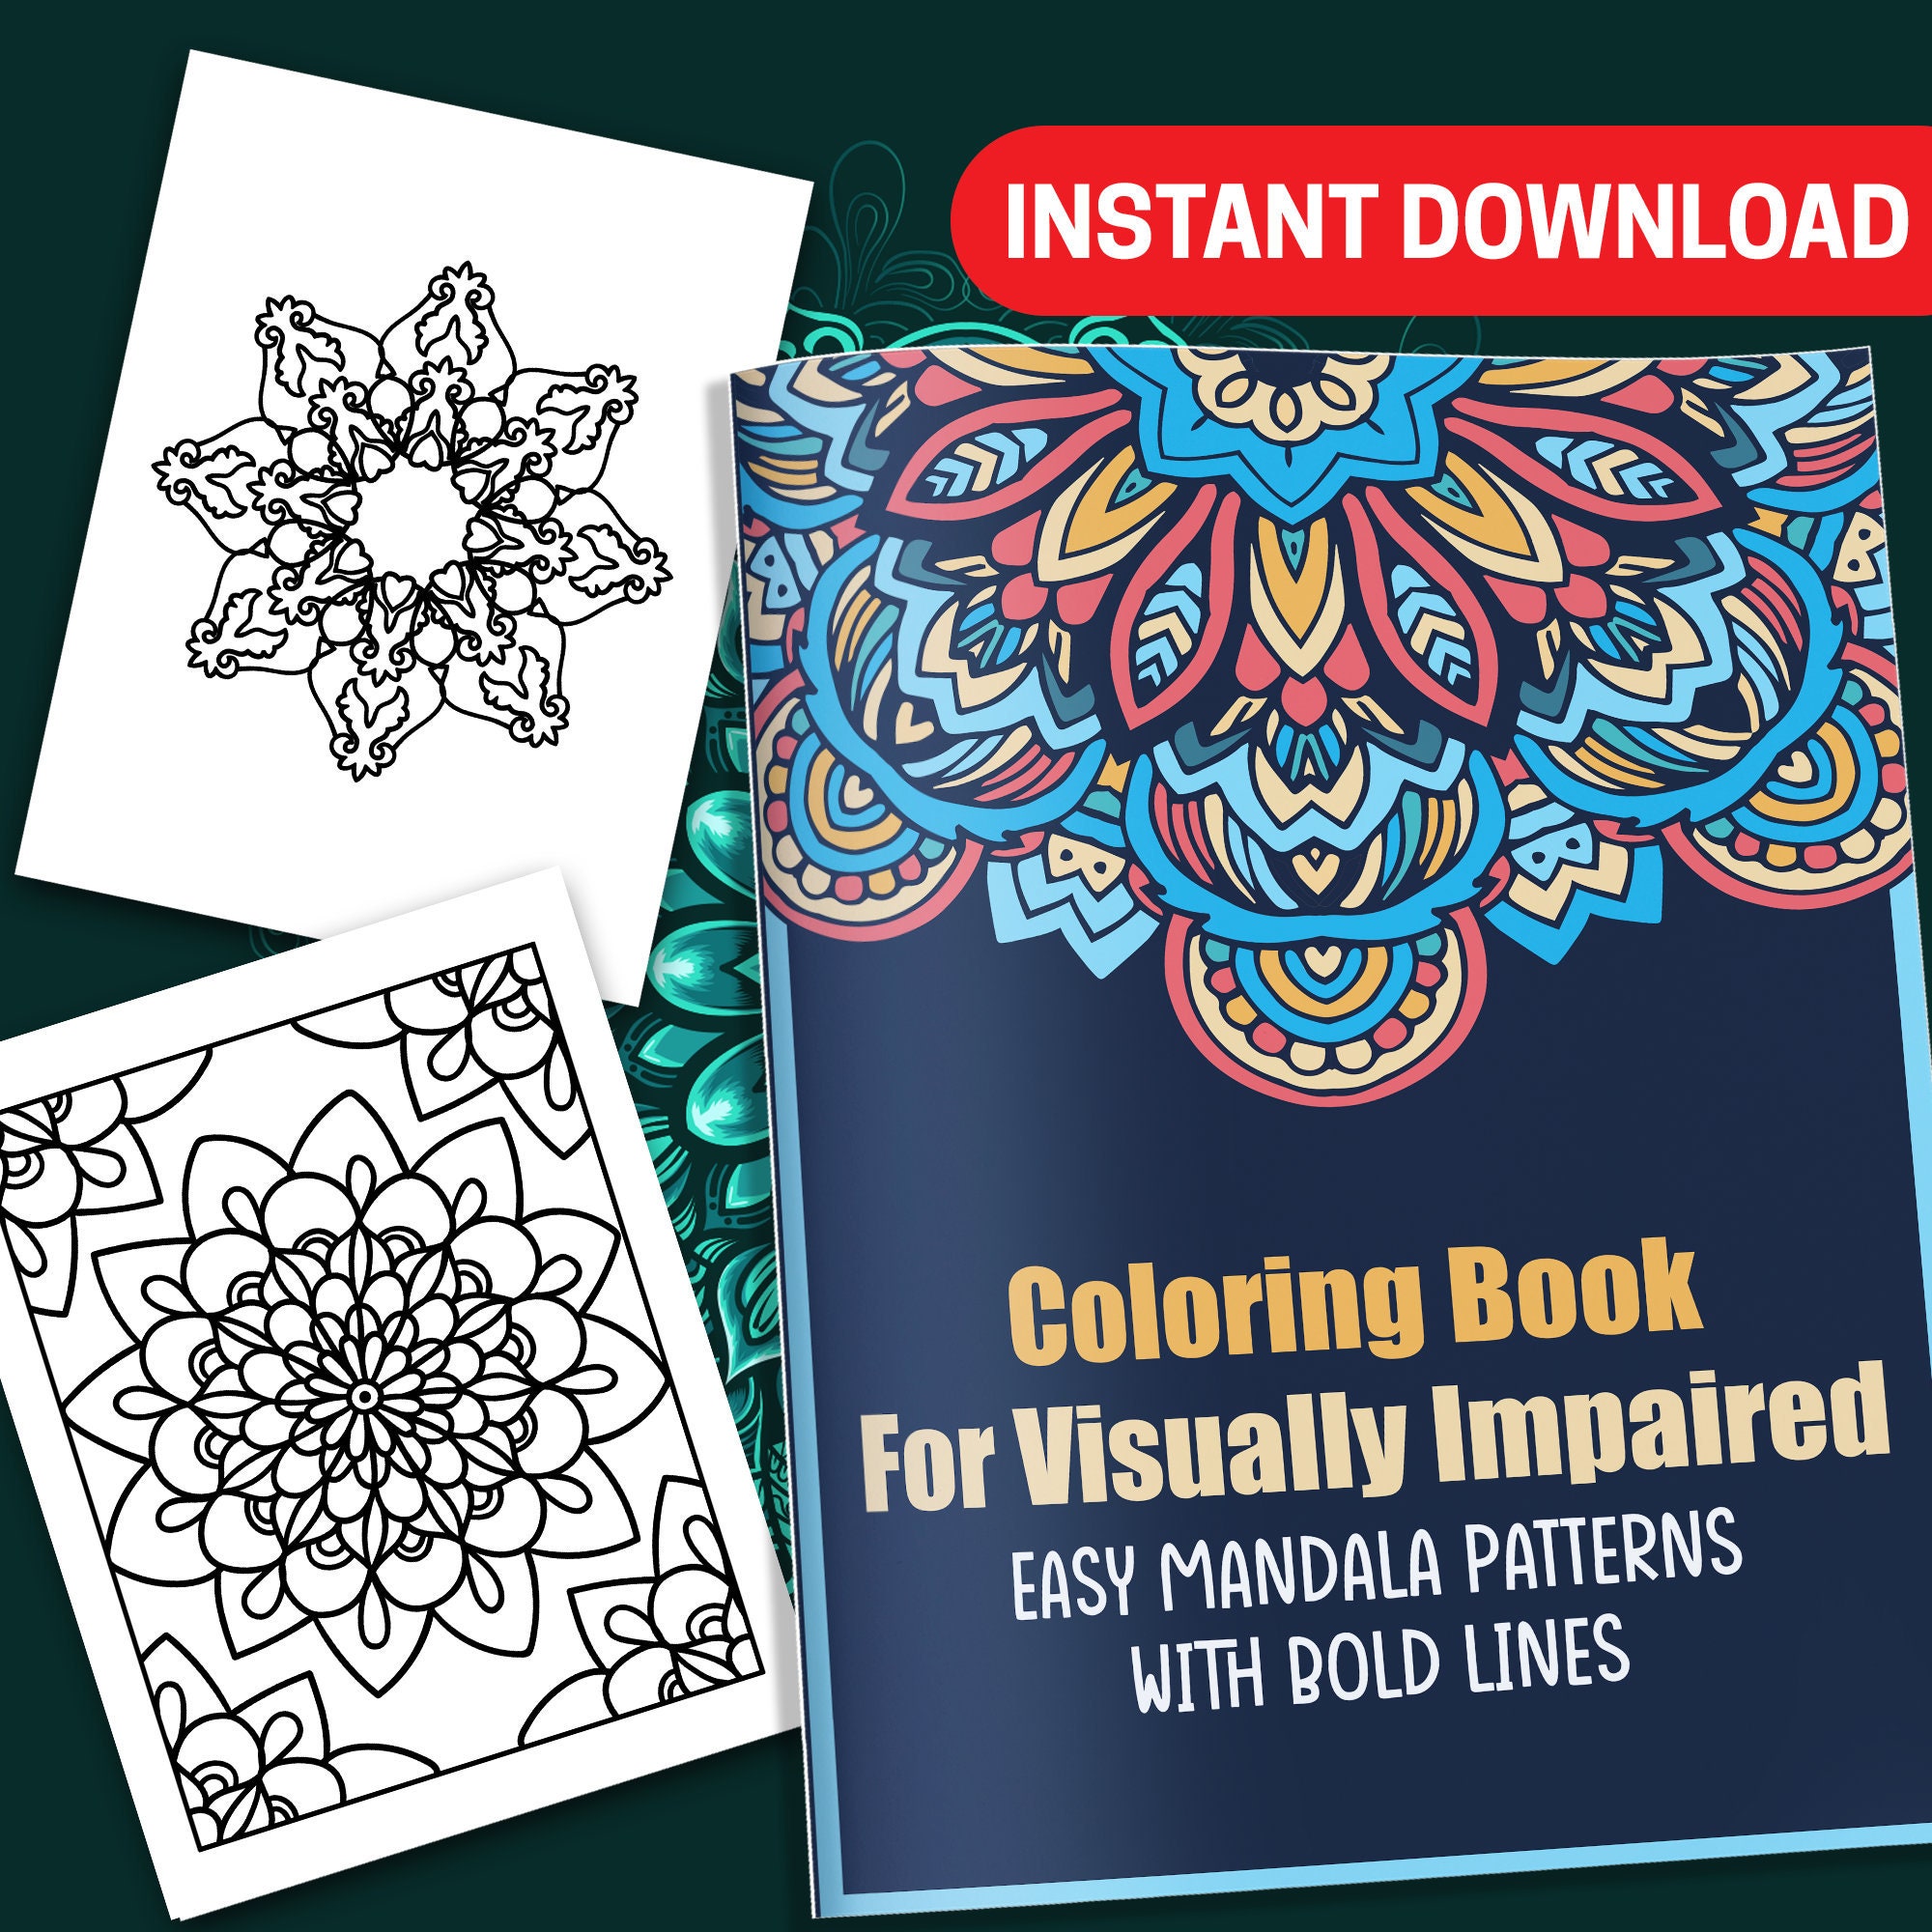 Bold And Easy Large Print Coloring Book for Adults: An Big And Simple  Coloring Book for Adults, Seniors, Beginners, Man and Women With Flower  Designs